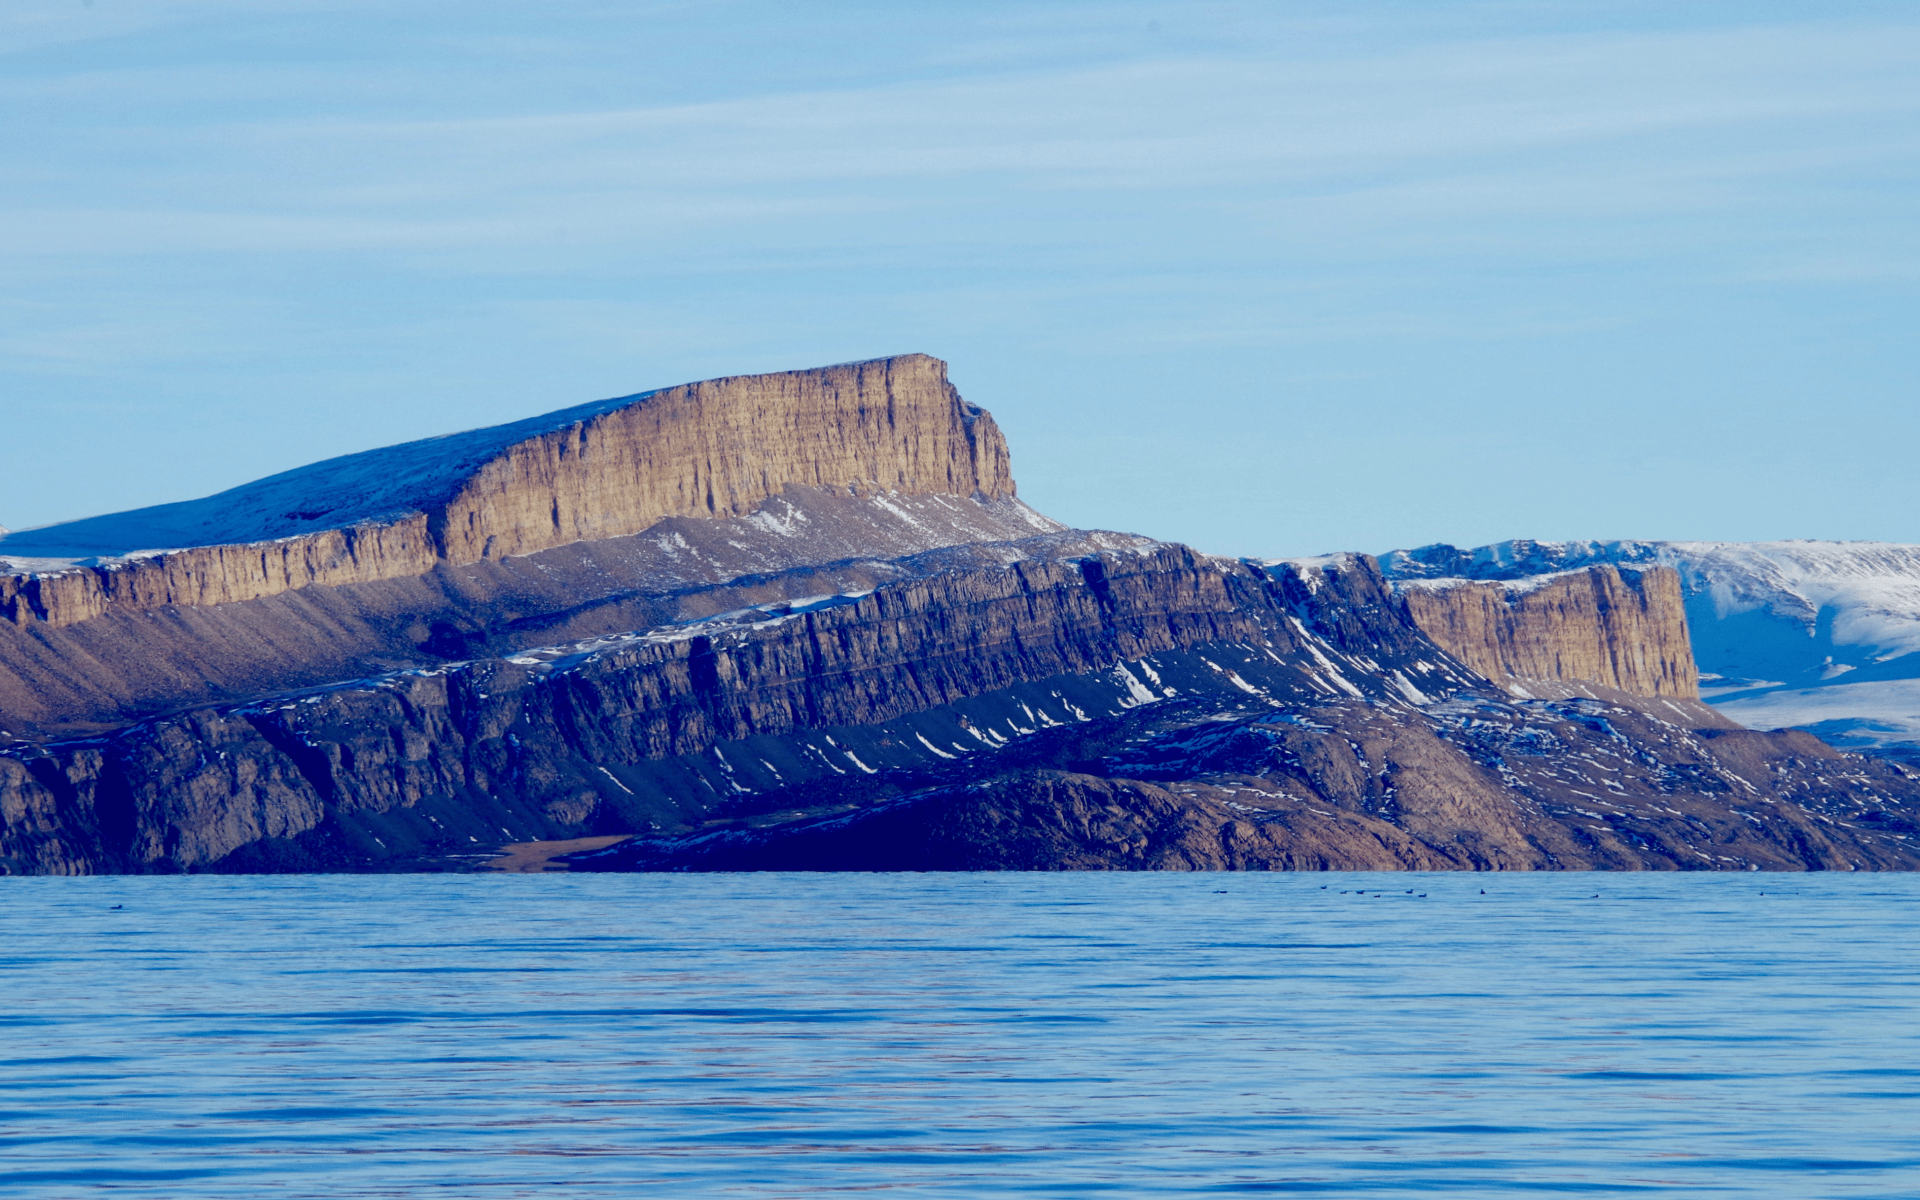 Cliffs in winter behind a large stretch of water